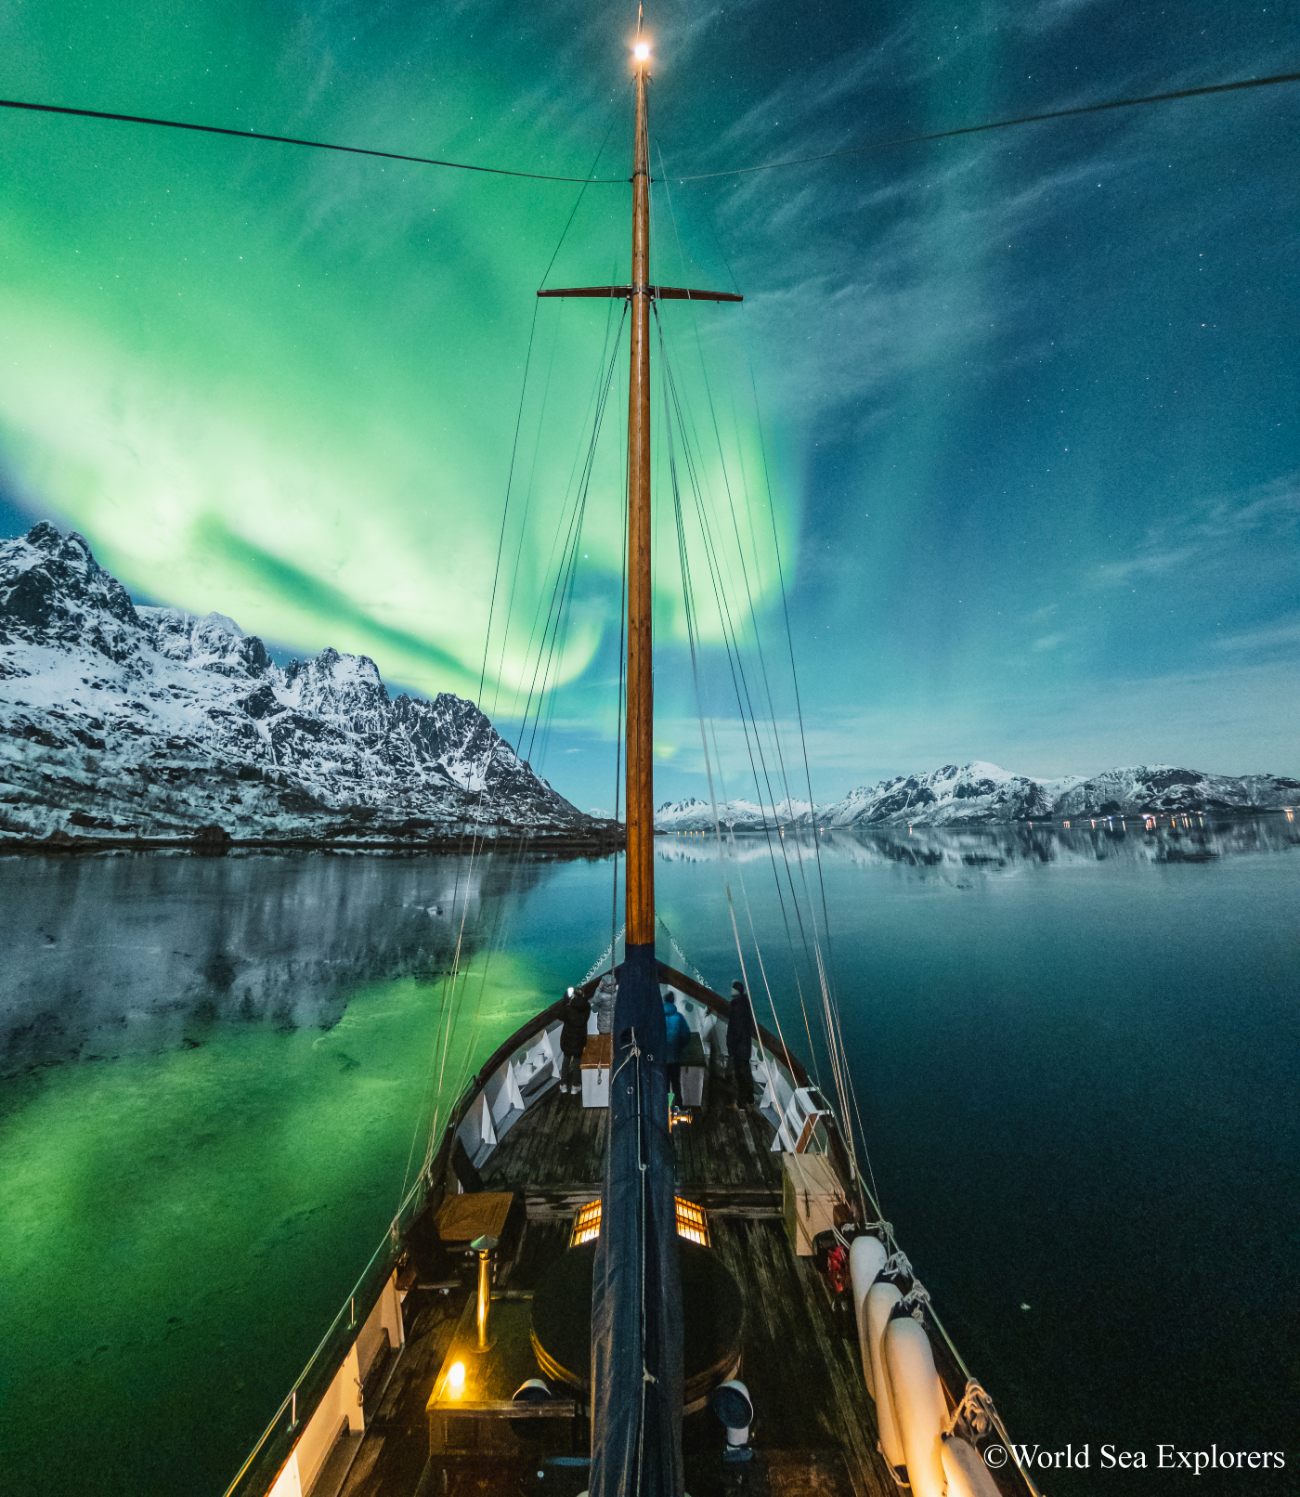 How to See the Northern Lights in the Lofoten Islands